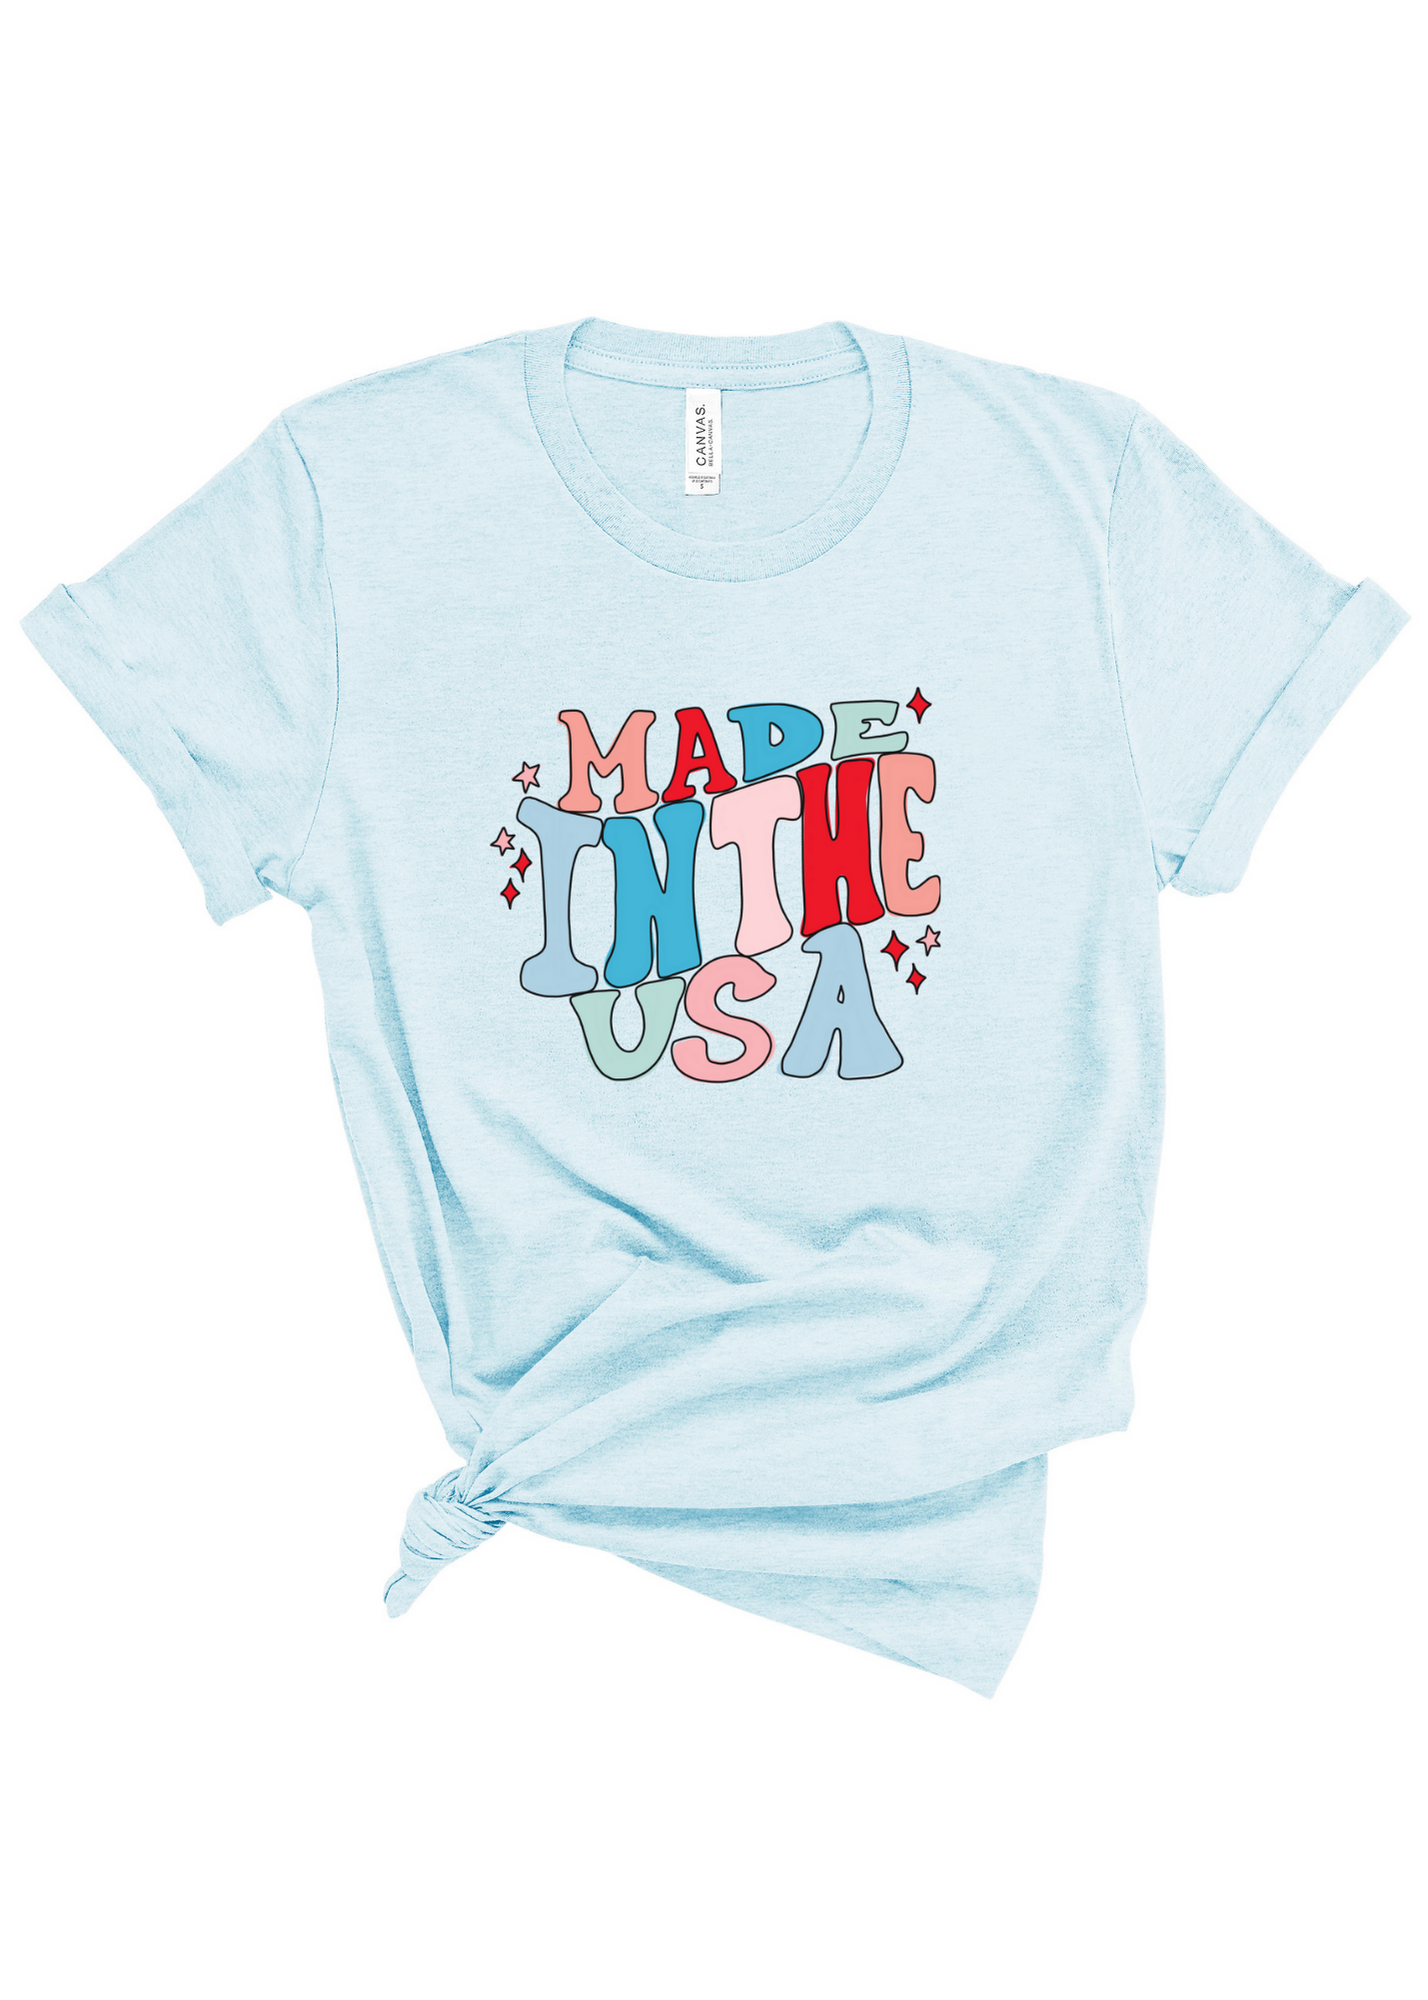 Made in the USA | Adult Tee-Sister Shirts-Sister Shirts, Cute & Custom Tees for Mama & Littles in Trussville, Alabama.